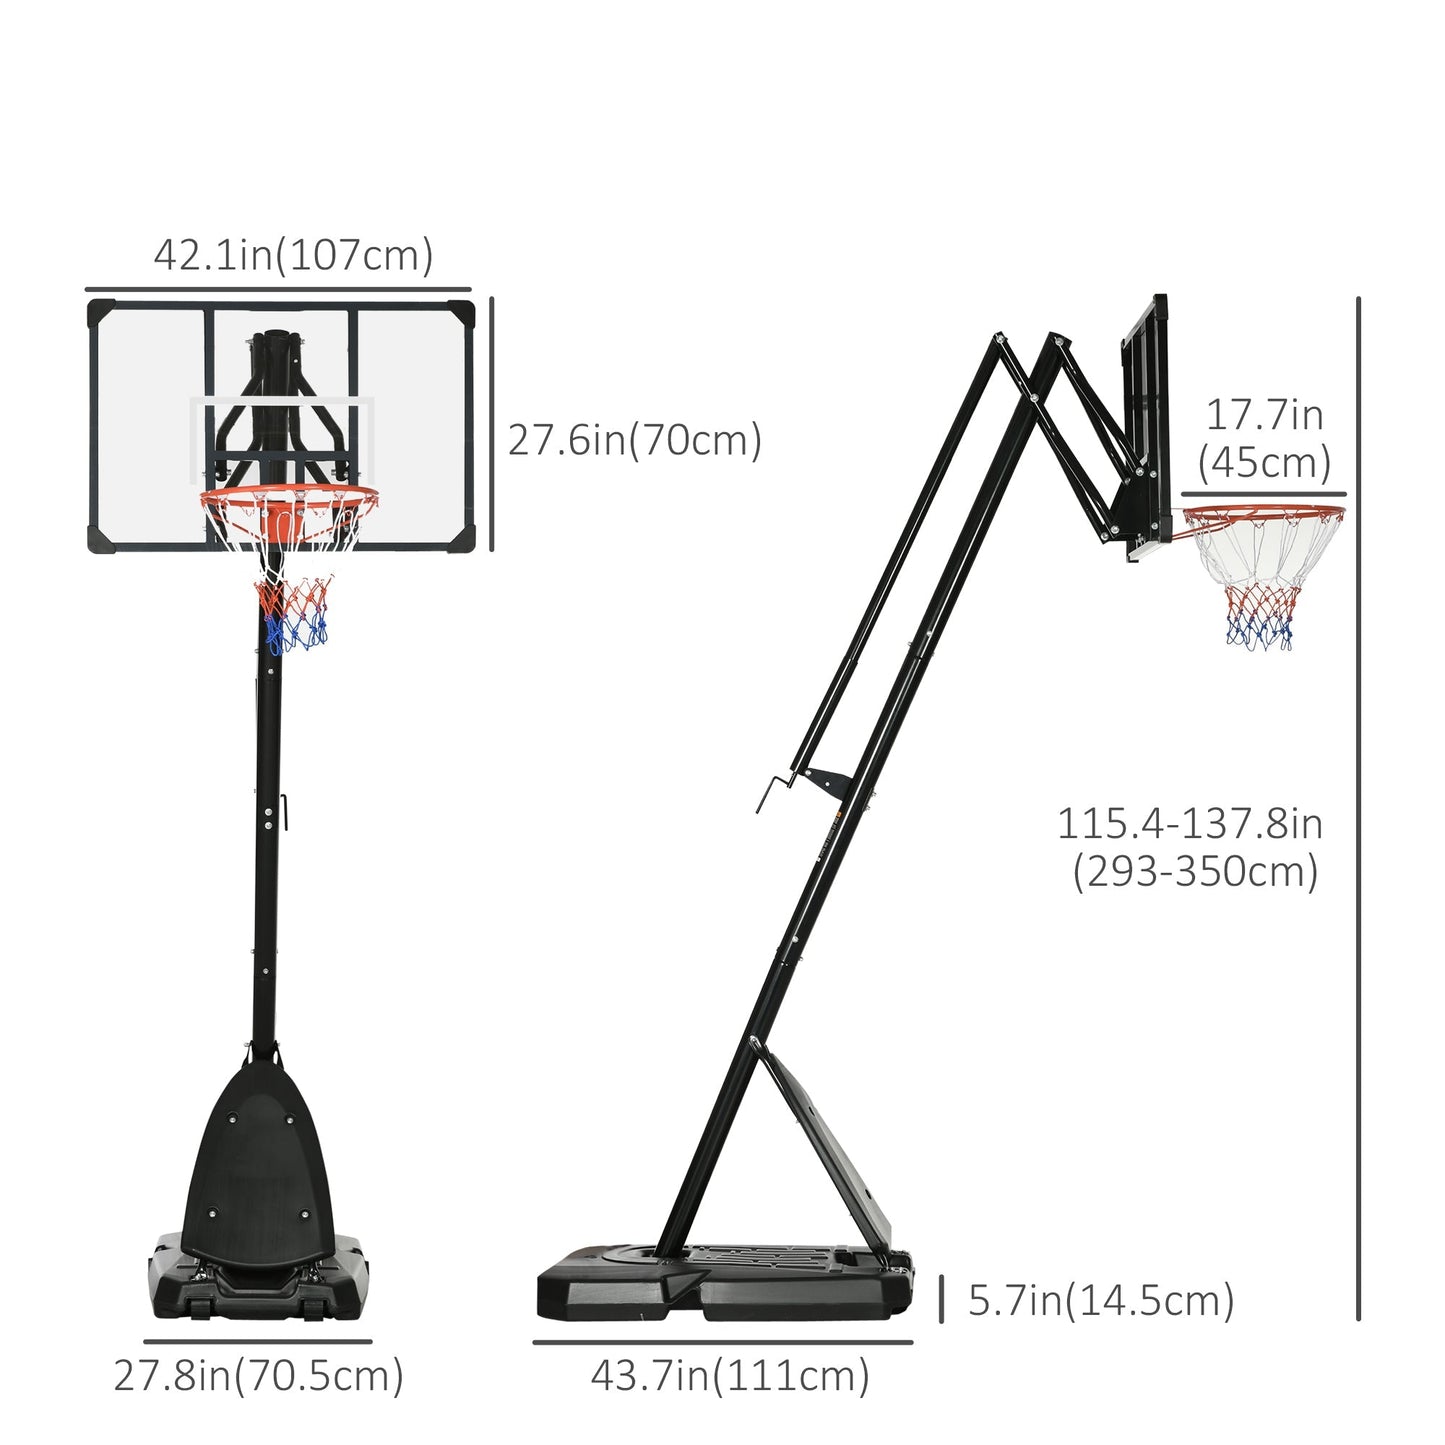 Outdoor Portable Basketball Hoop and Stand with Backboard Weighted Base Wheels, 115.4"-137.8" Height Adjustable at Gallery Canada